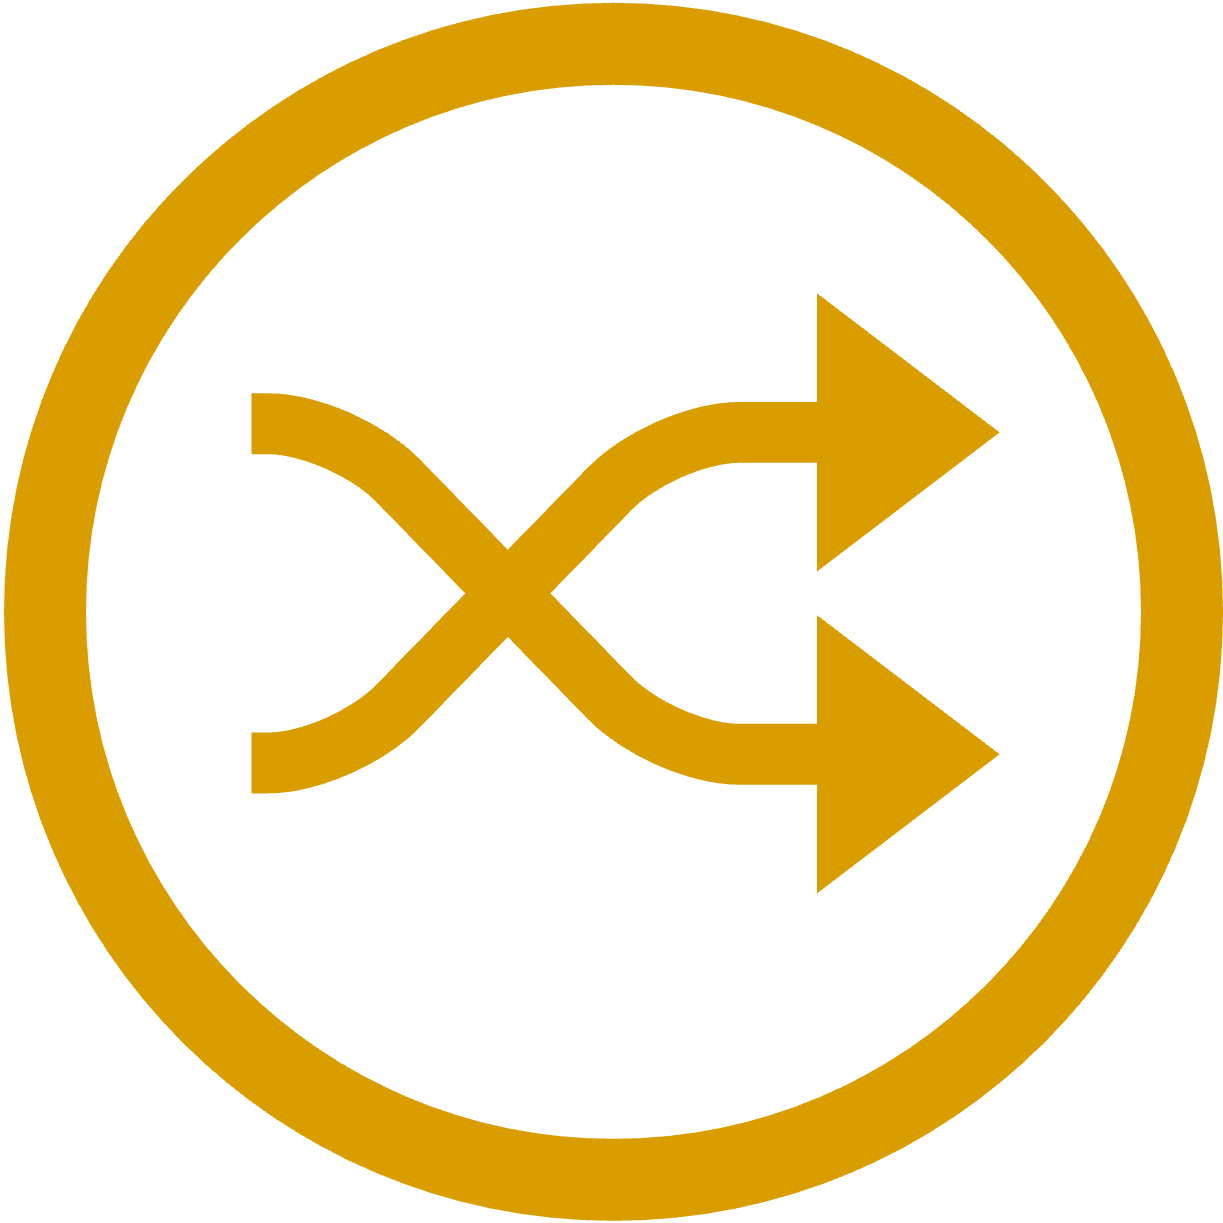 Icon of crossing arrows inside a circle